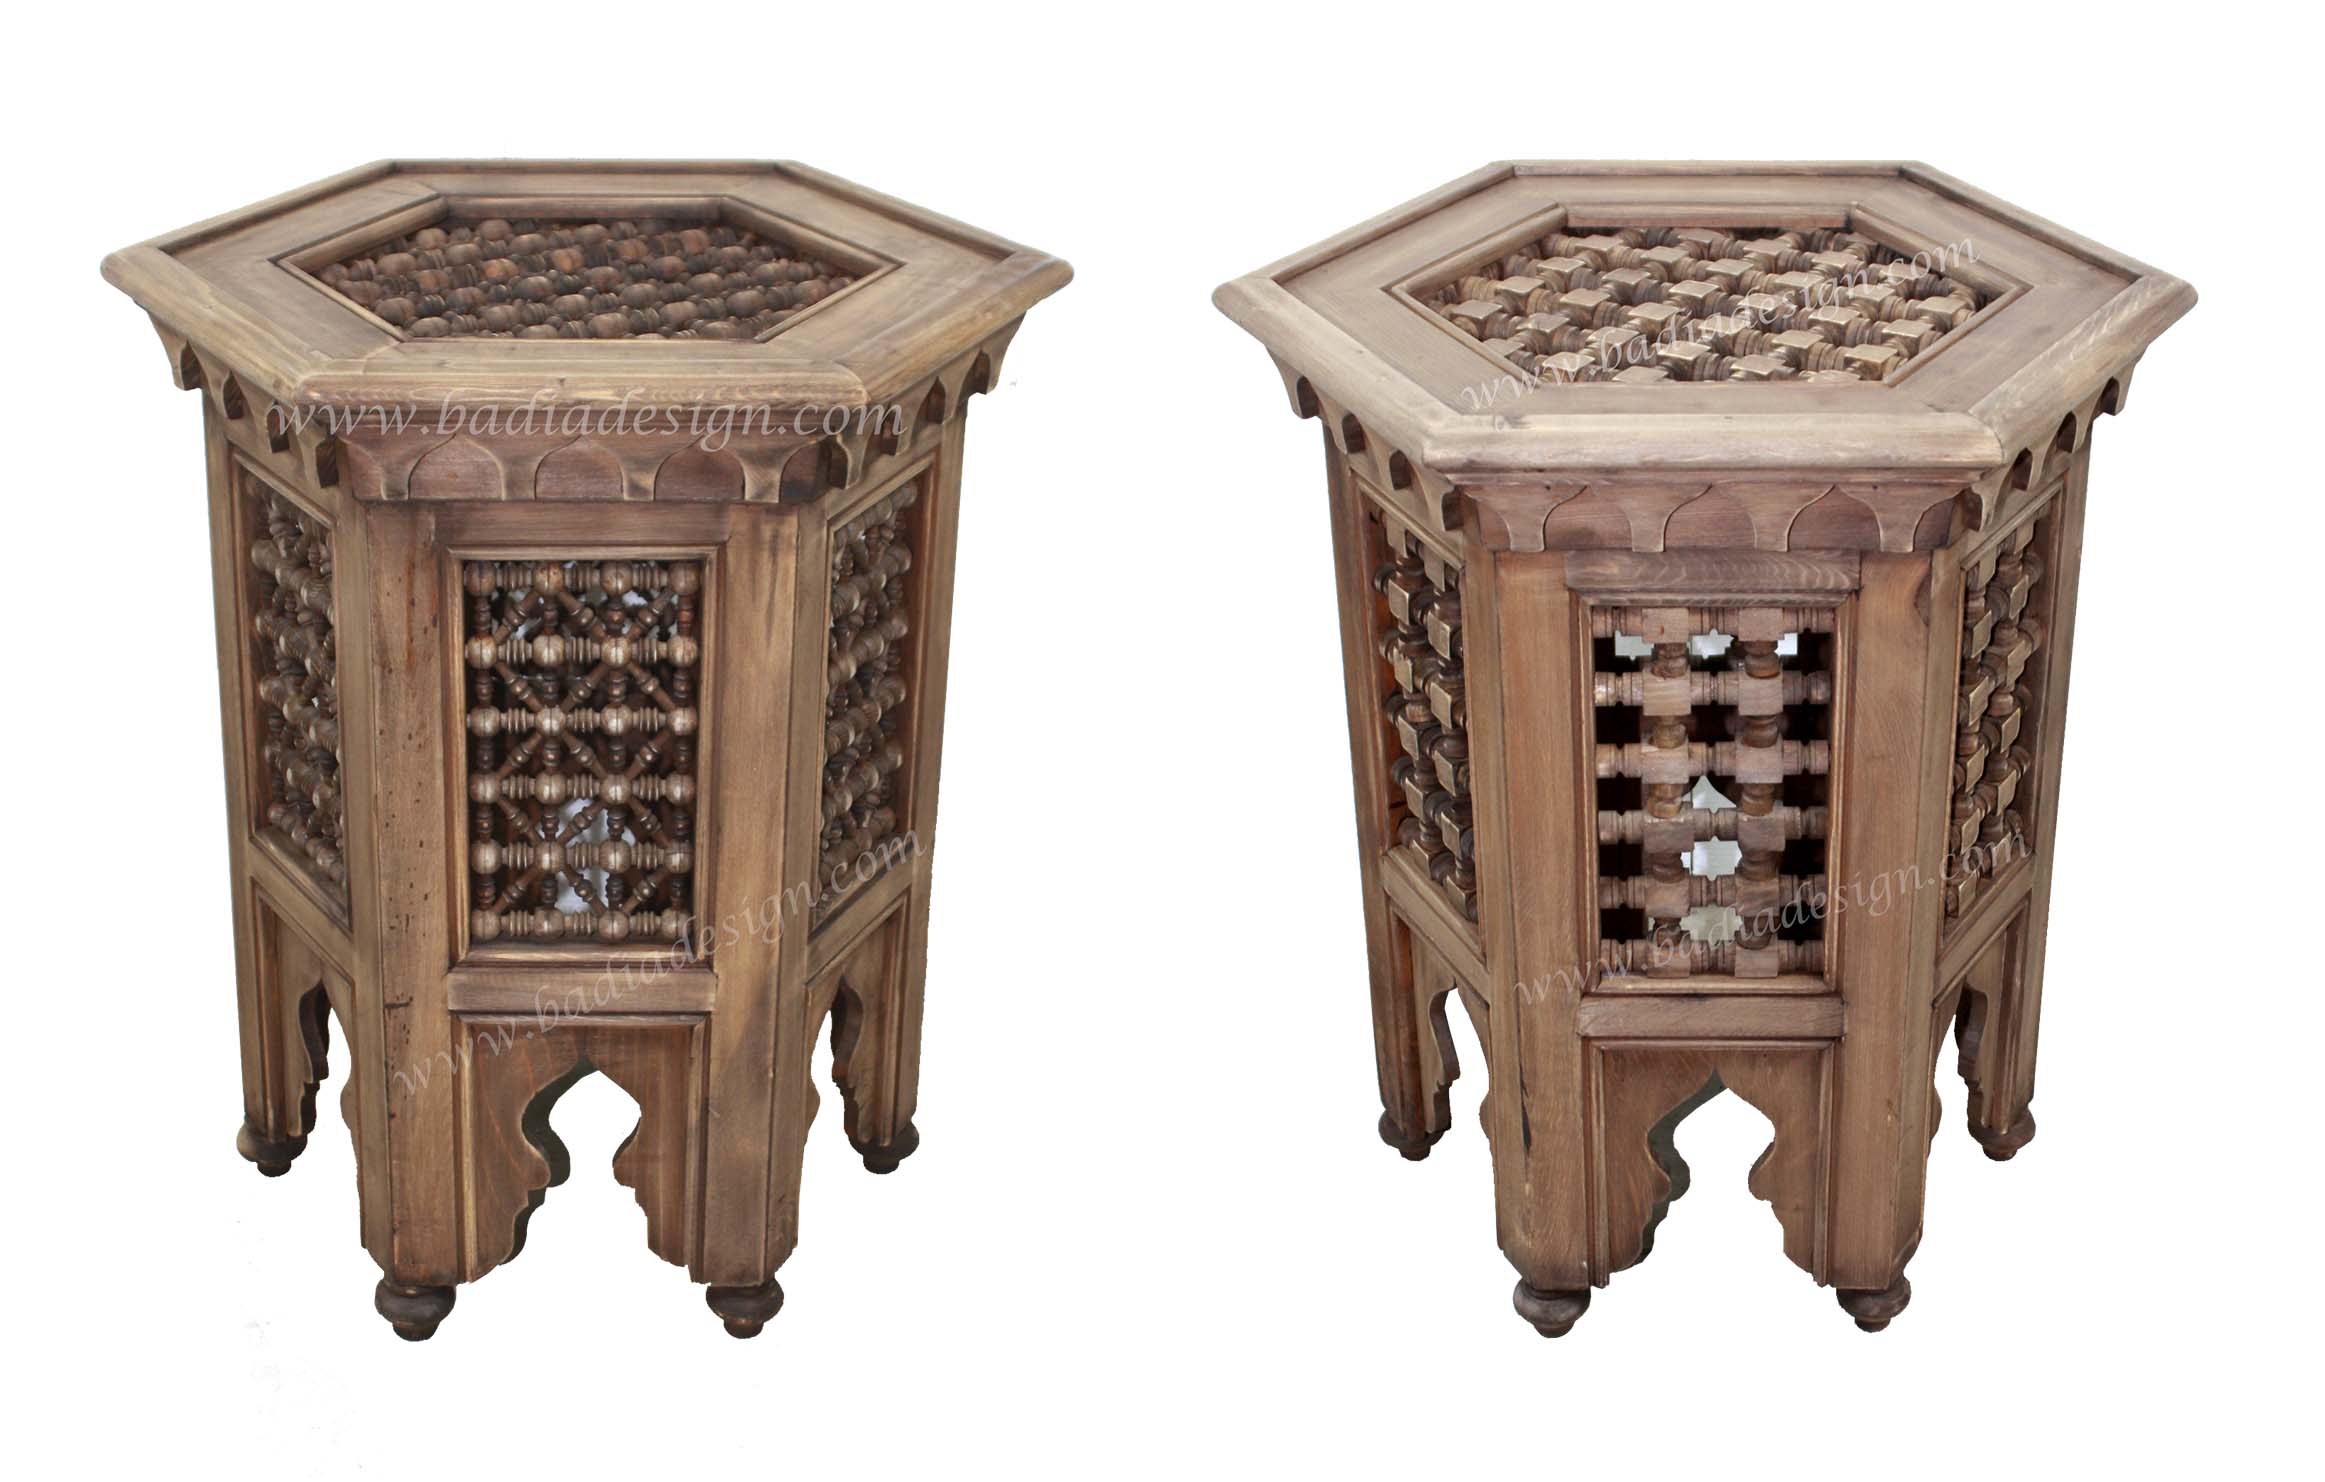 moroccan-wooden-moucharabieh-side-table-cw-st042.jpg